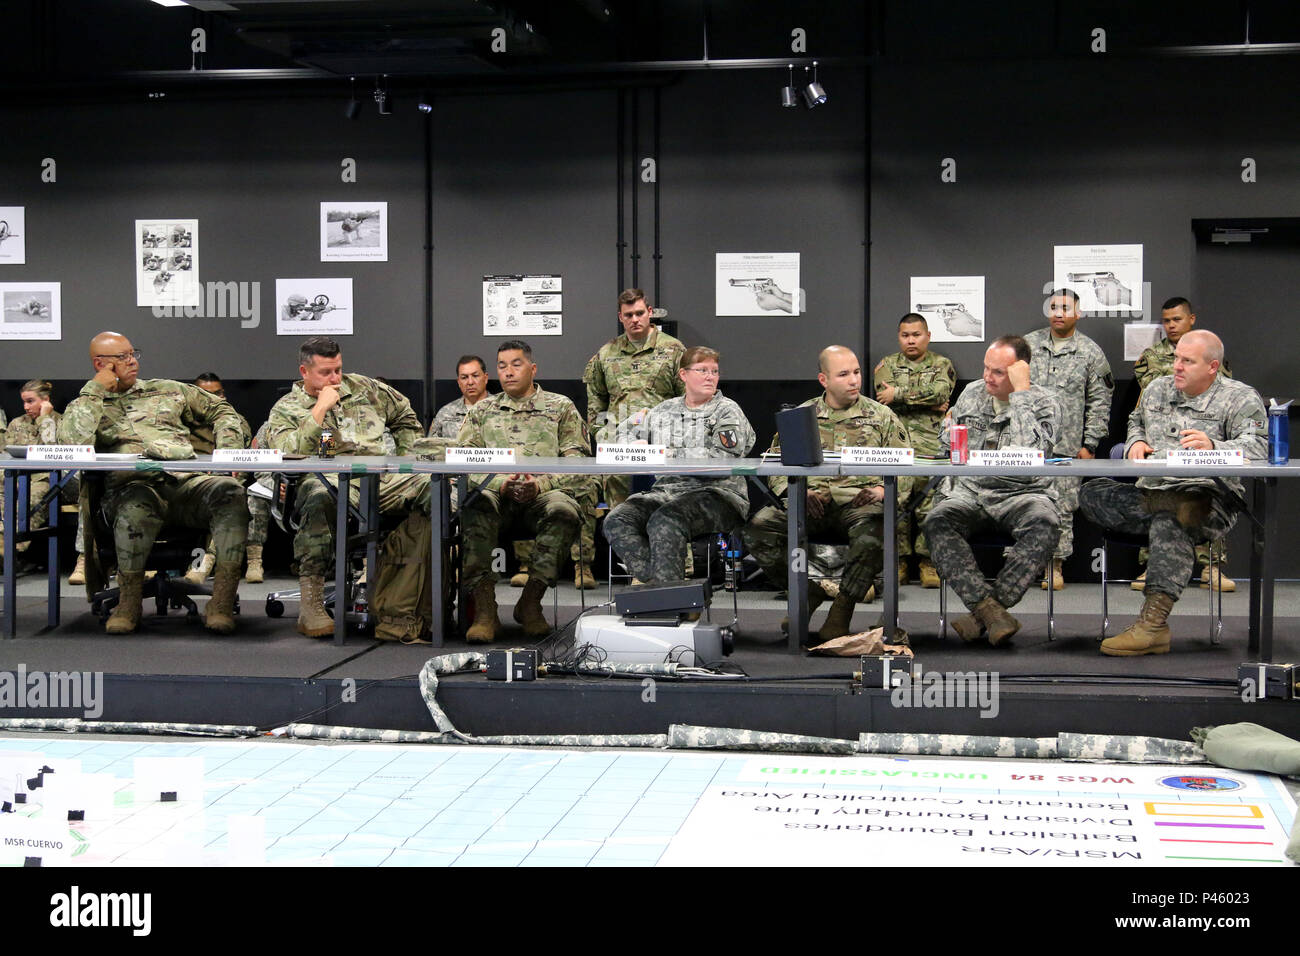 Commanding officers and noncommissioned officers of the host unit and supporting units of exercise Imua Dawn 2016 discuss their unit’s mission concepts and concerns during the Combined Arms Rehearsal brief at Imua Dawn 2016, Sagamihara Depot, Japan, June 15, 2016. Imua Dawn 2016 focuses on maneuver support operations and enhancing cooperative capabilities in mobility, Humanitarian Assistance and Disaster Relief (HADR), Noncombatant Evacuation Operations (NEO), and sustainment support in the event of natural disasters and other crises that threaten public safety and health in the Pacific region Stock Photo